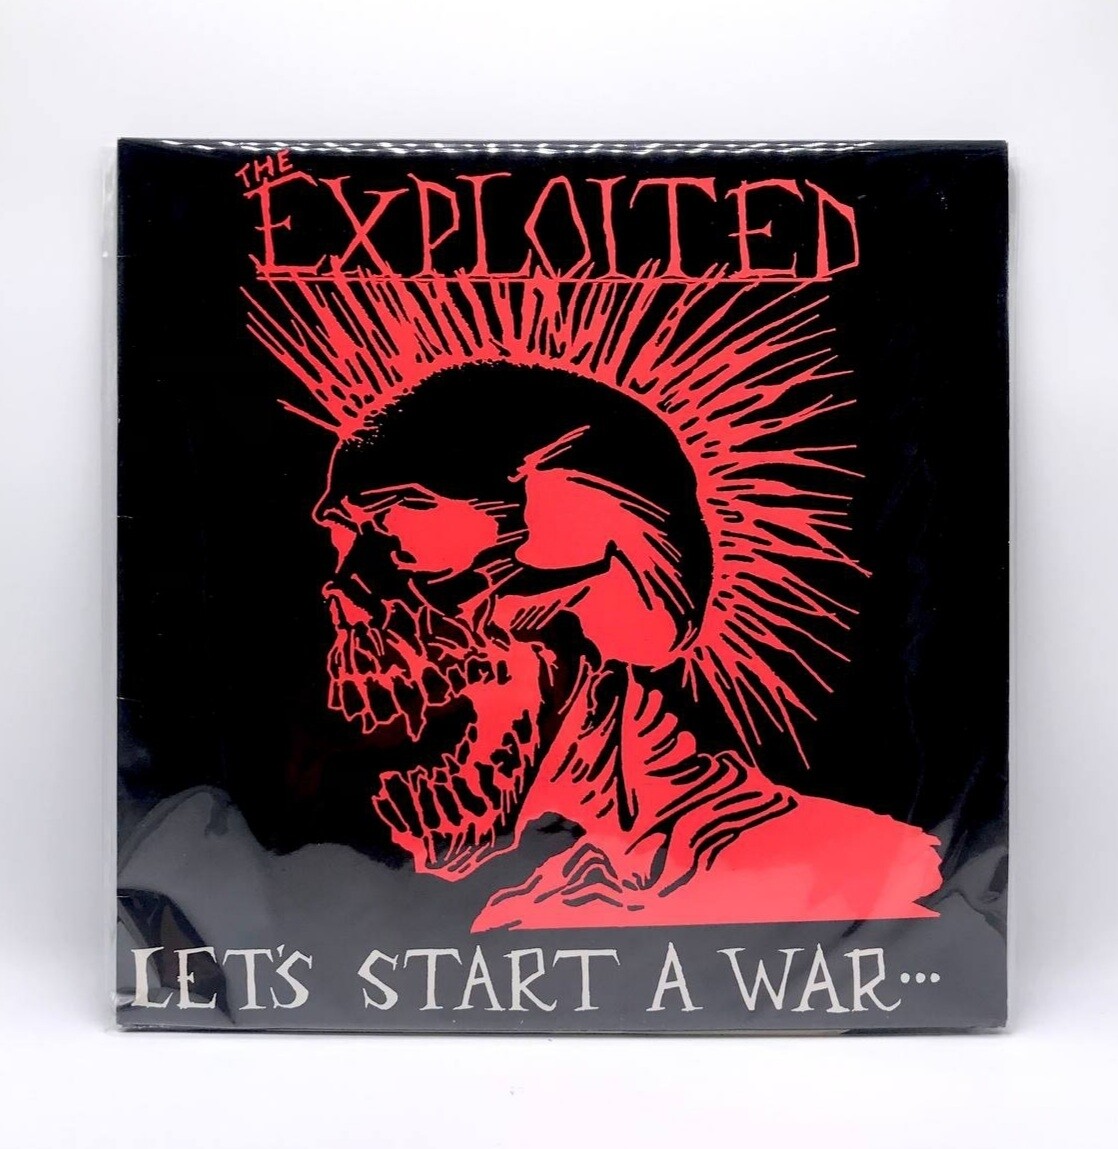 [USED] THE EXPLOITED -LETS START A WAR- LP